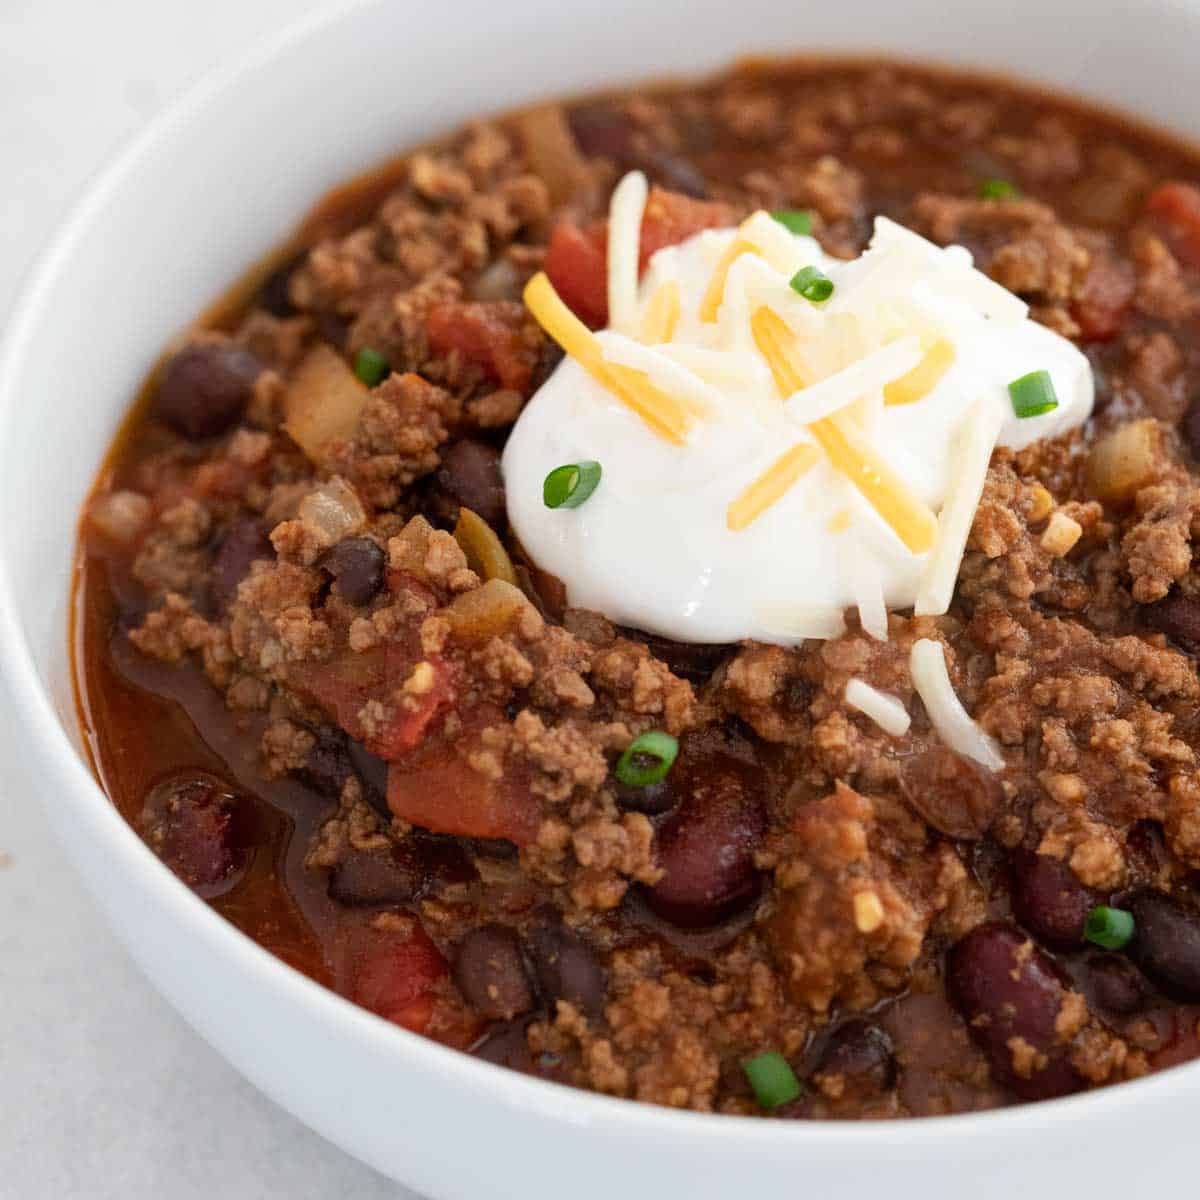 Easy Dutch Oven Chili Recipe - Stovetop Chili with Beans or Not